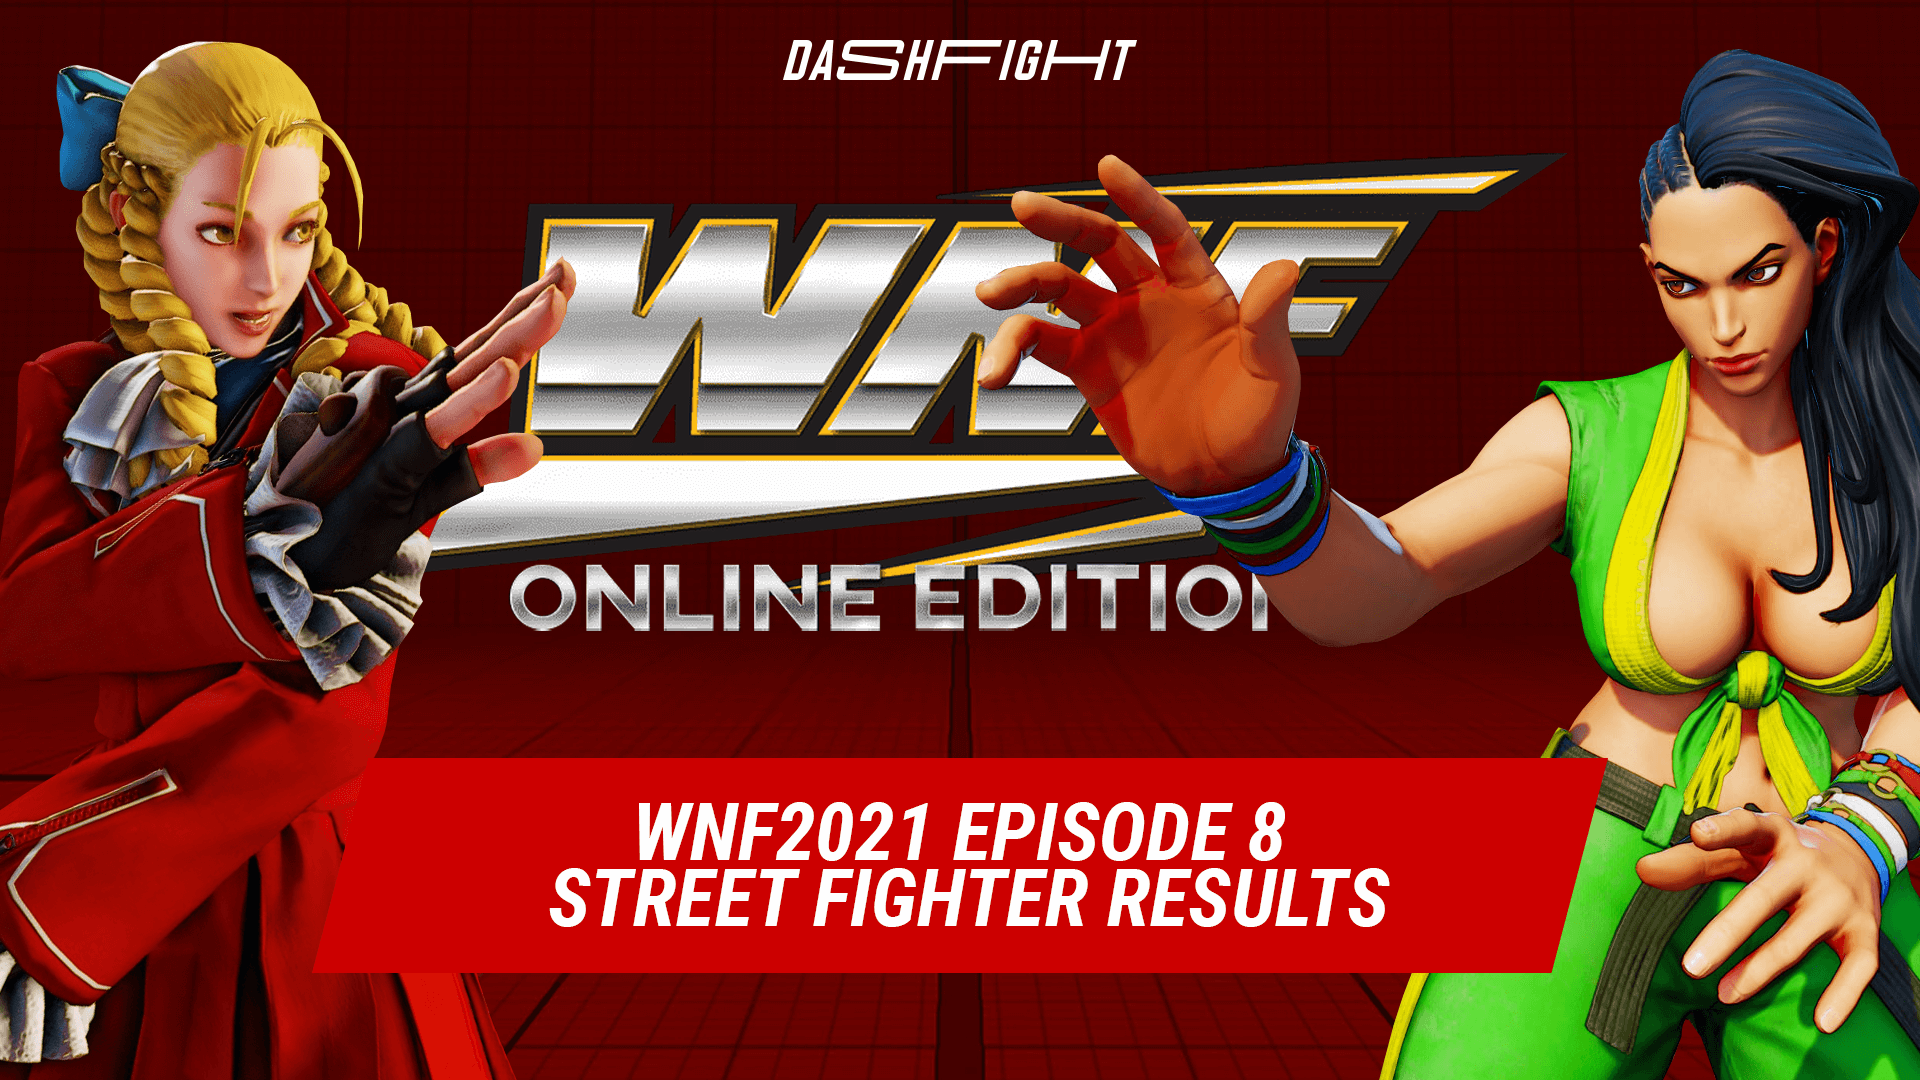 WNF2021 Episode 8 Results - 3 Generations of Street Fighter